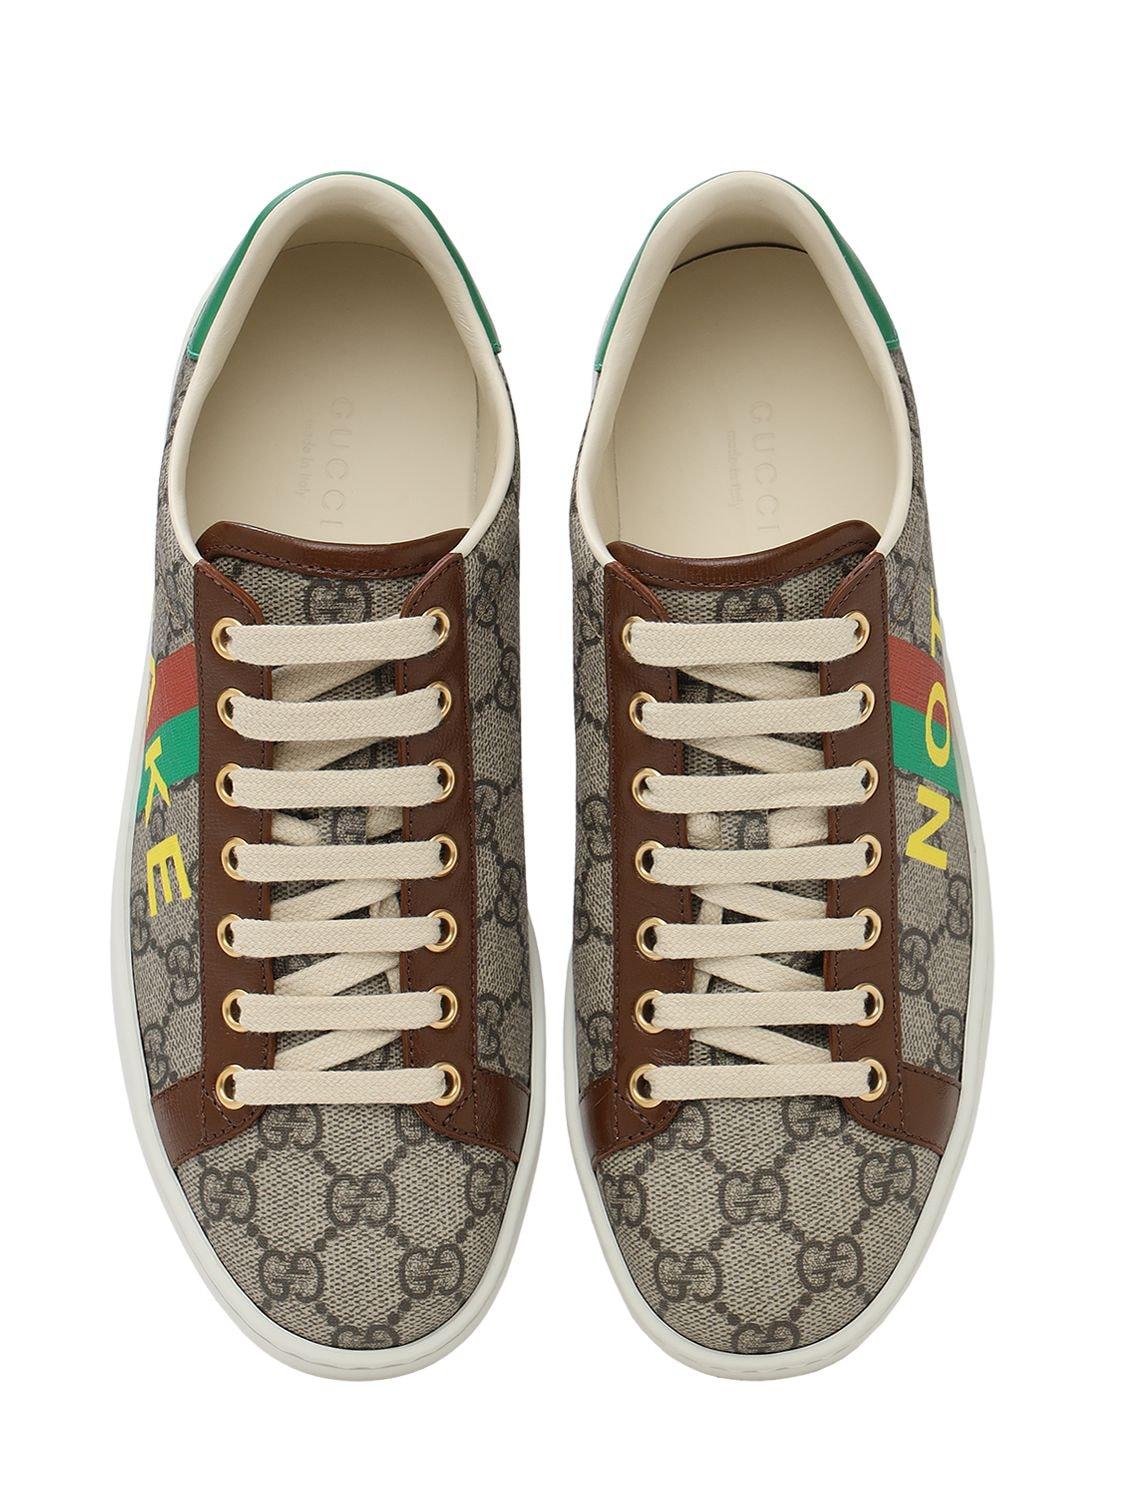 Gucci Canvas 20mm New Ace Printed Supreme Sneakers in Natural - Lyst